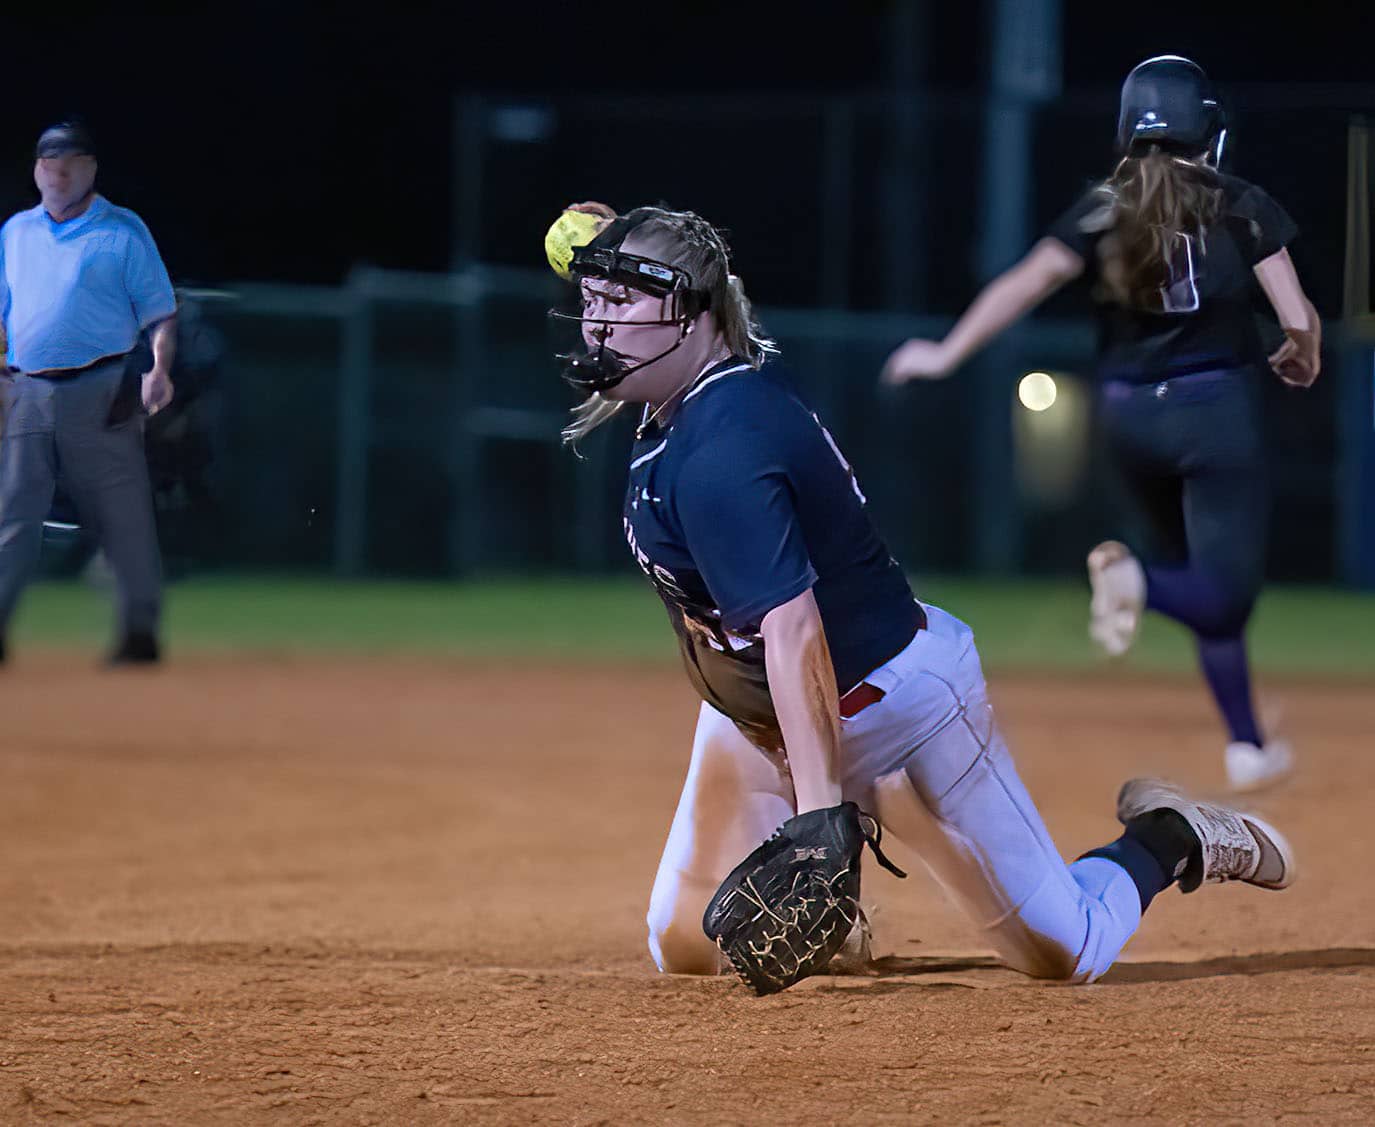 Springstead High second baseman, Liberty Savarese throws to first after a diving snare of a ground ball in the game against Hernando High Thursday night.Photo by JOE DiCRISTOFALO